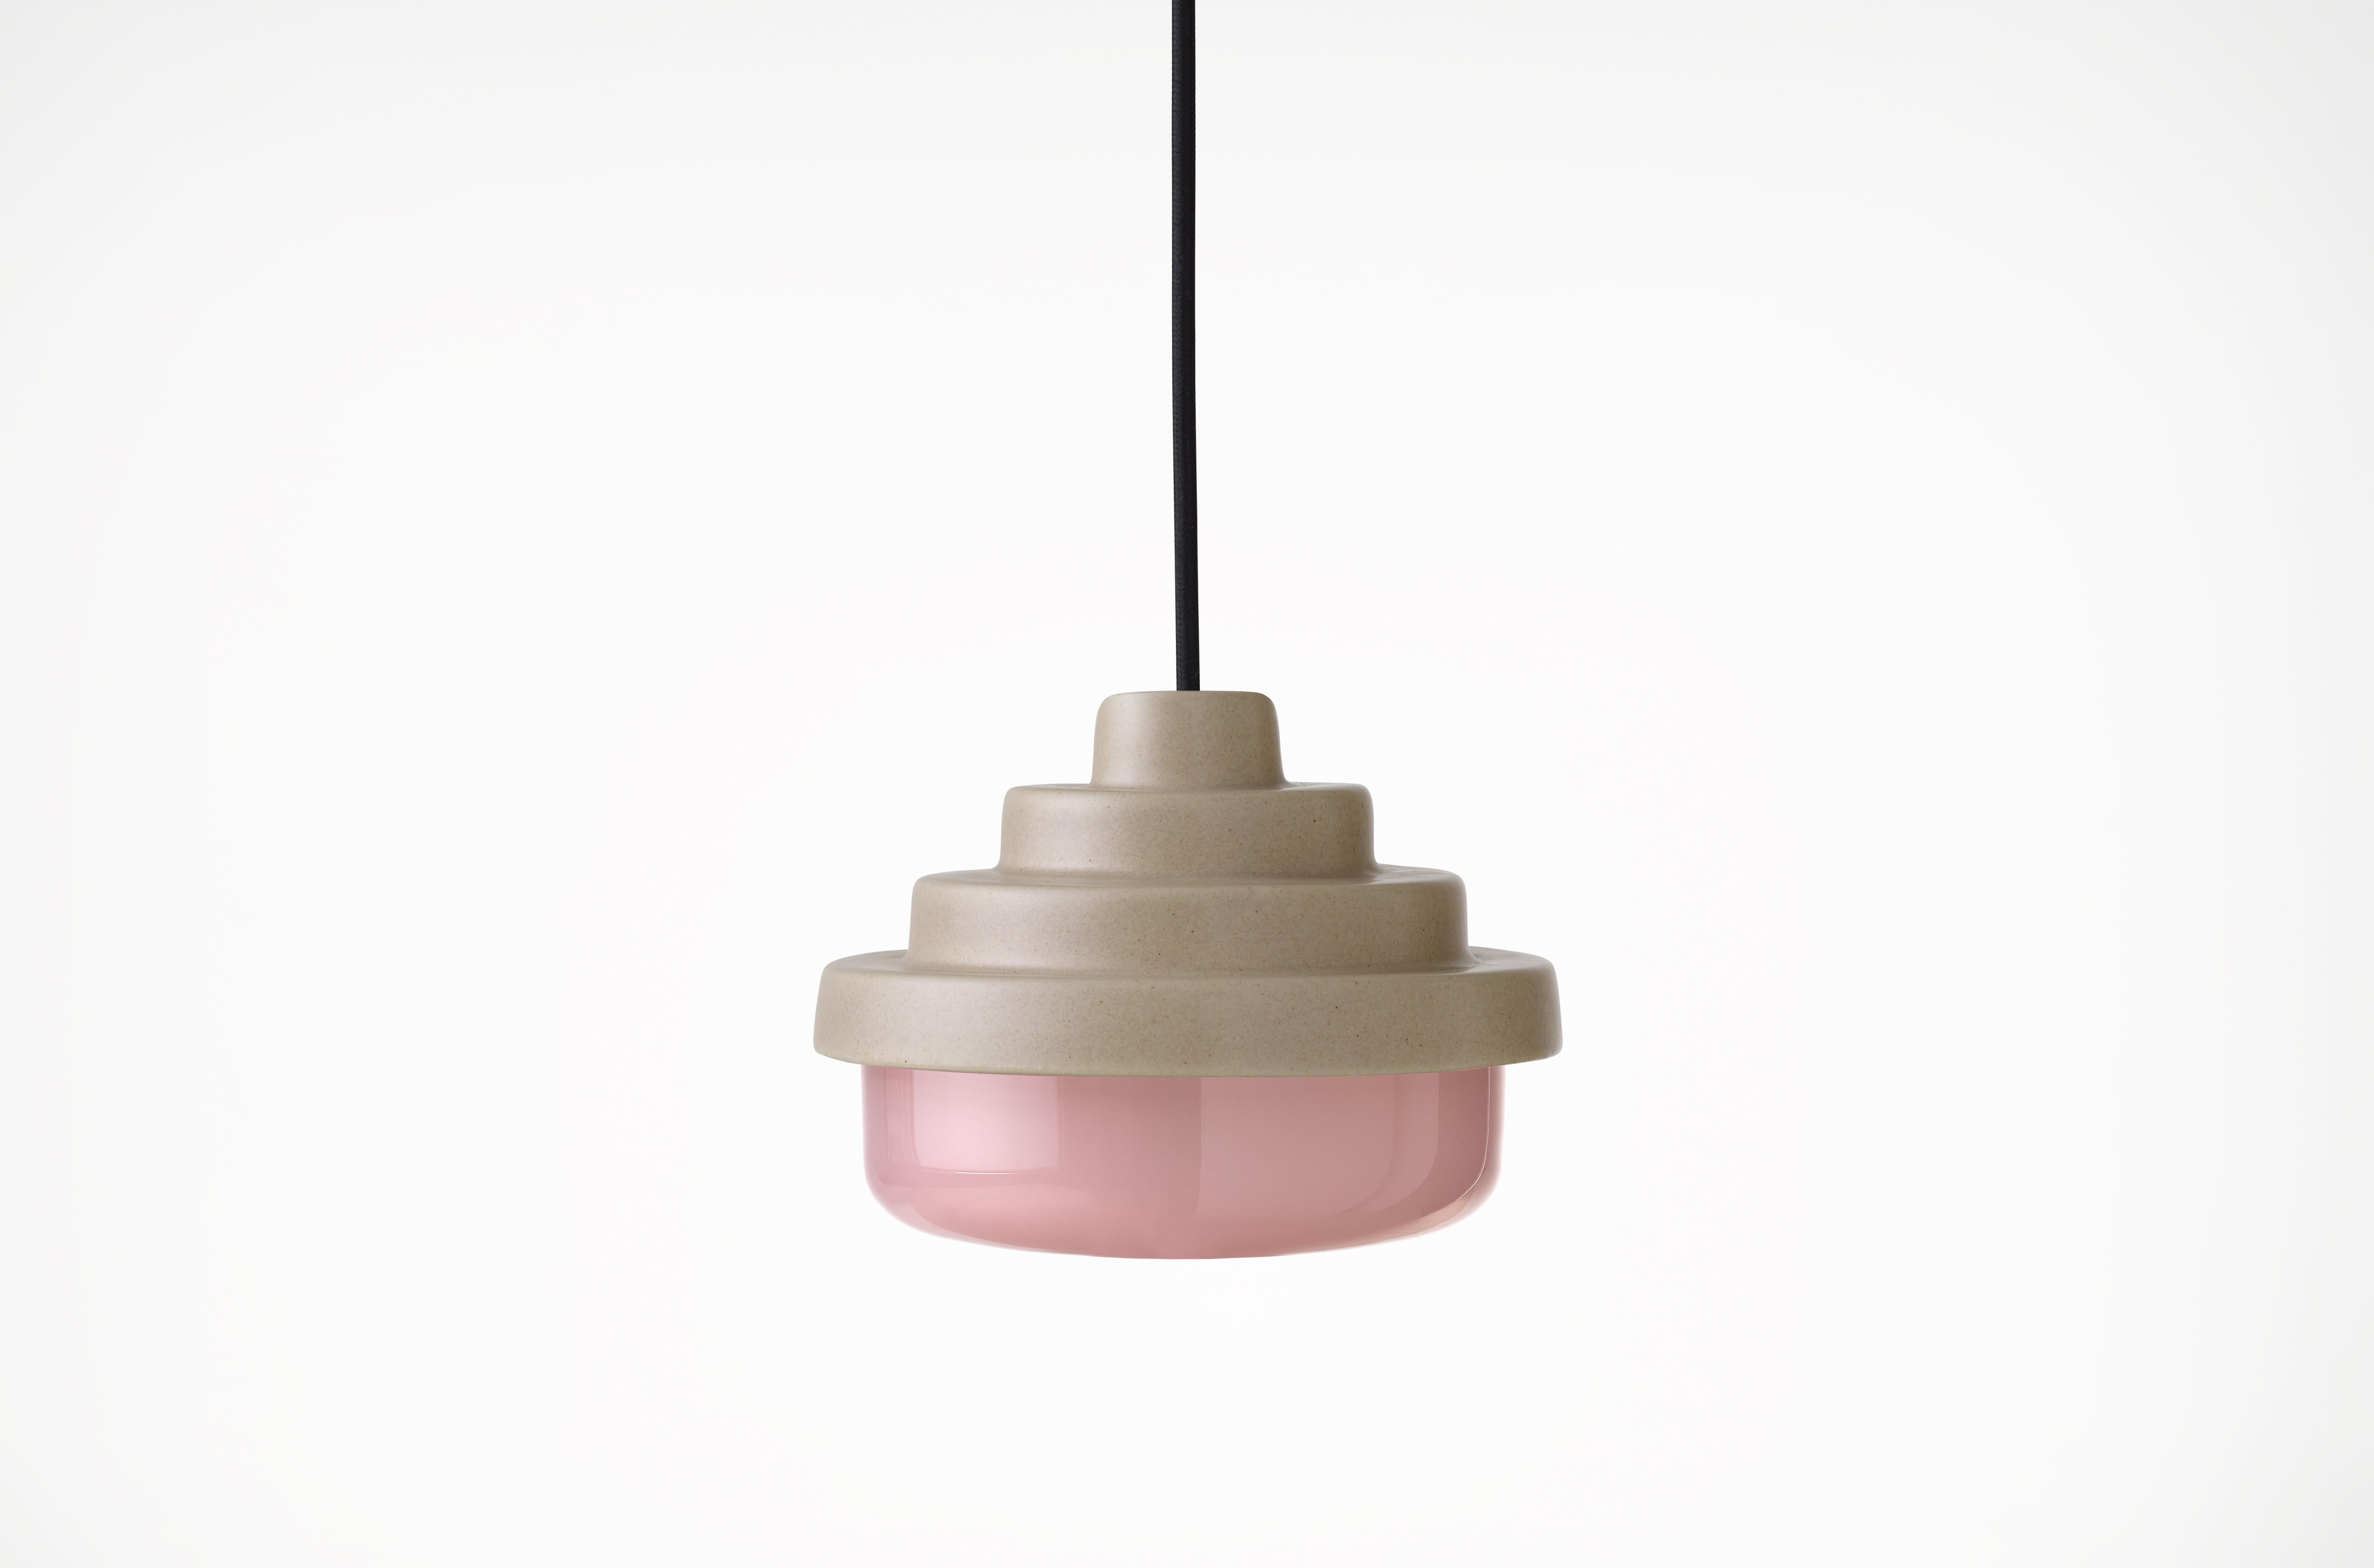 Earth and Pink Honey Pendant Light by Coco Flip
Dimensions: D 18 x W 18 x H 13 cm
Materials: Slip cast ceramic stoneware with blown glass. 
Weight: Approx. 2kg
Glass finishes: Pink.
Ceramic finishes: Earth satin glaze. 

Standard fixtures included
1